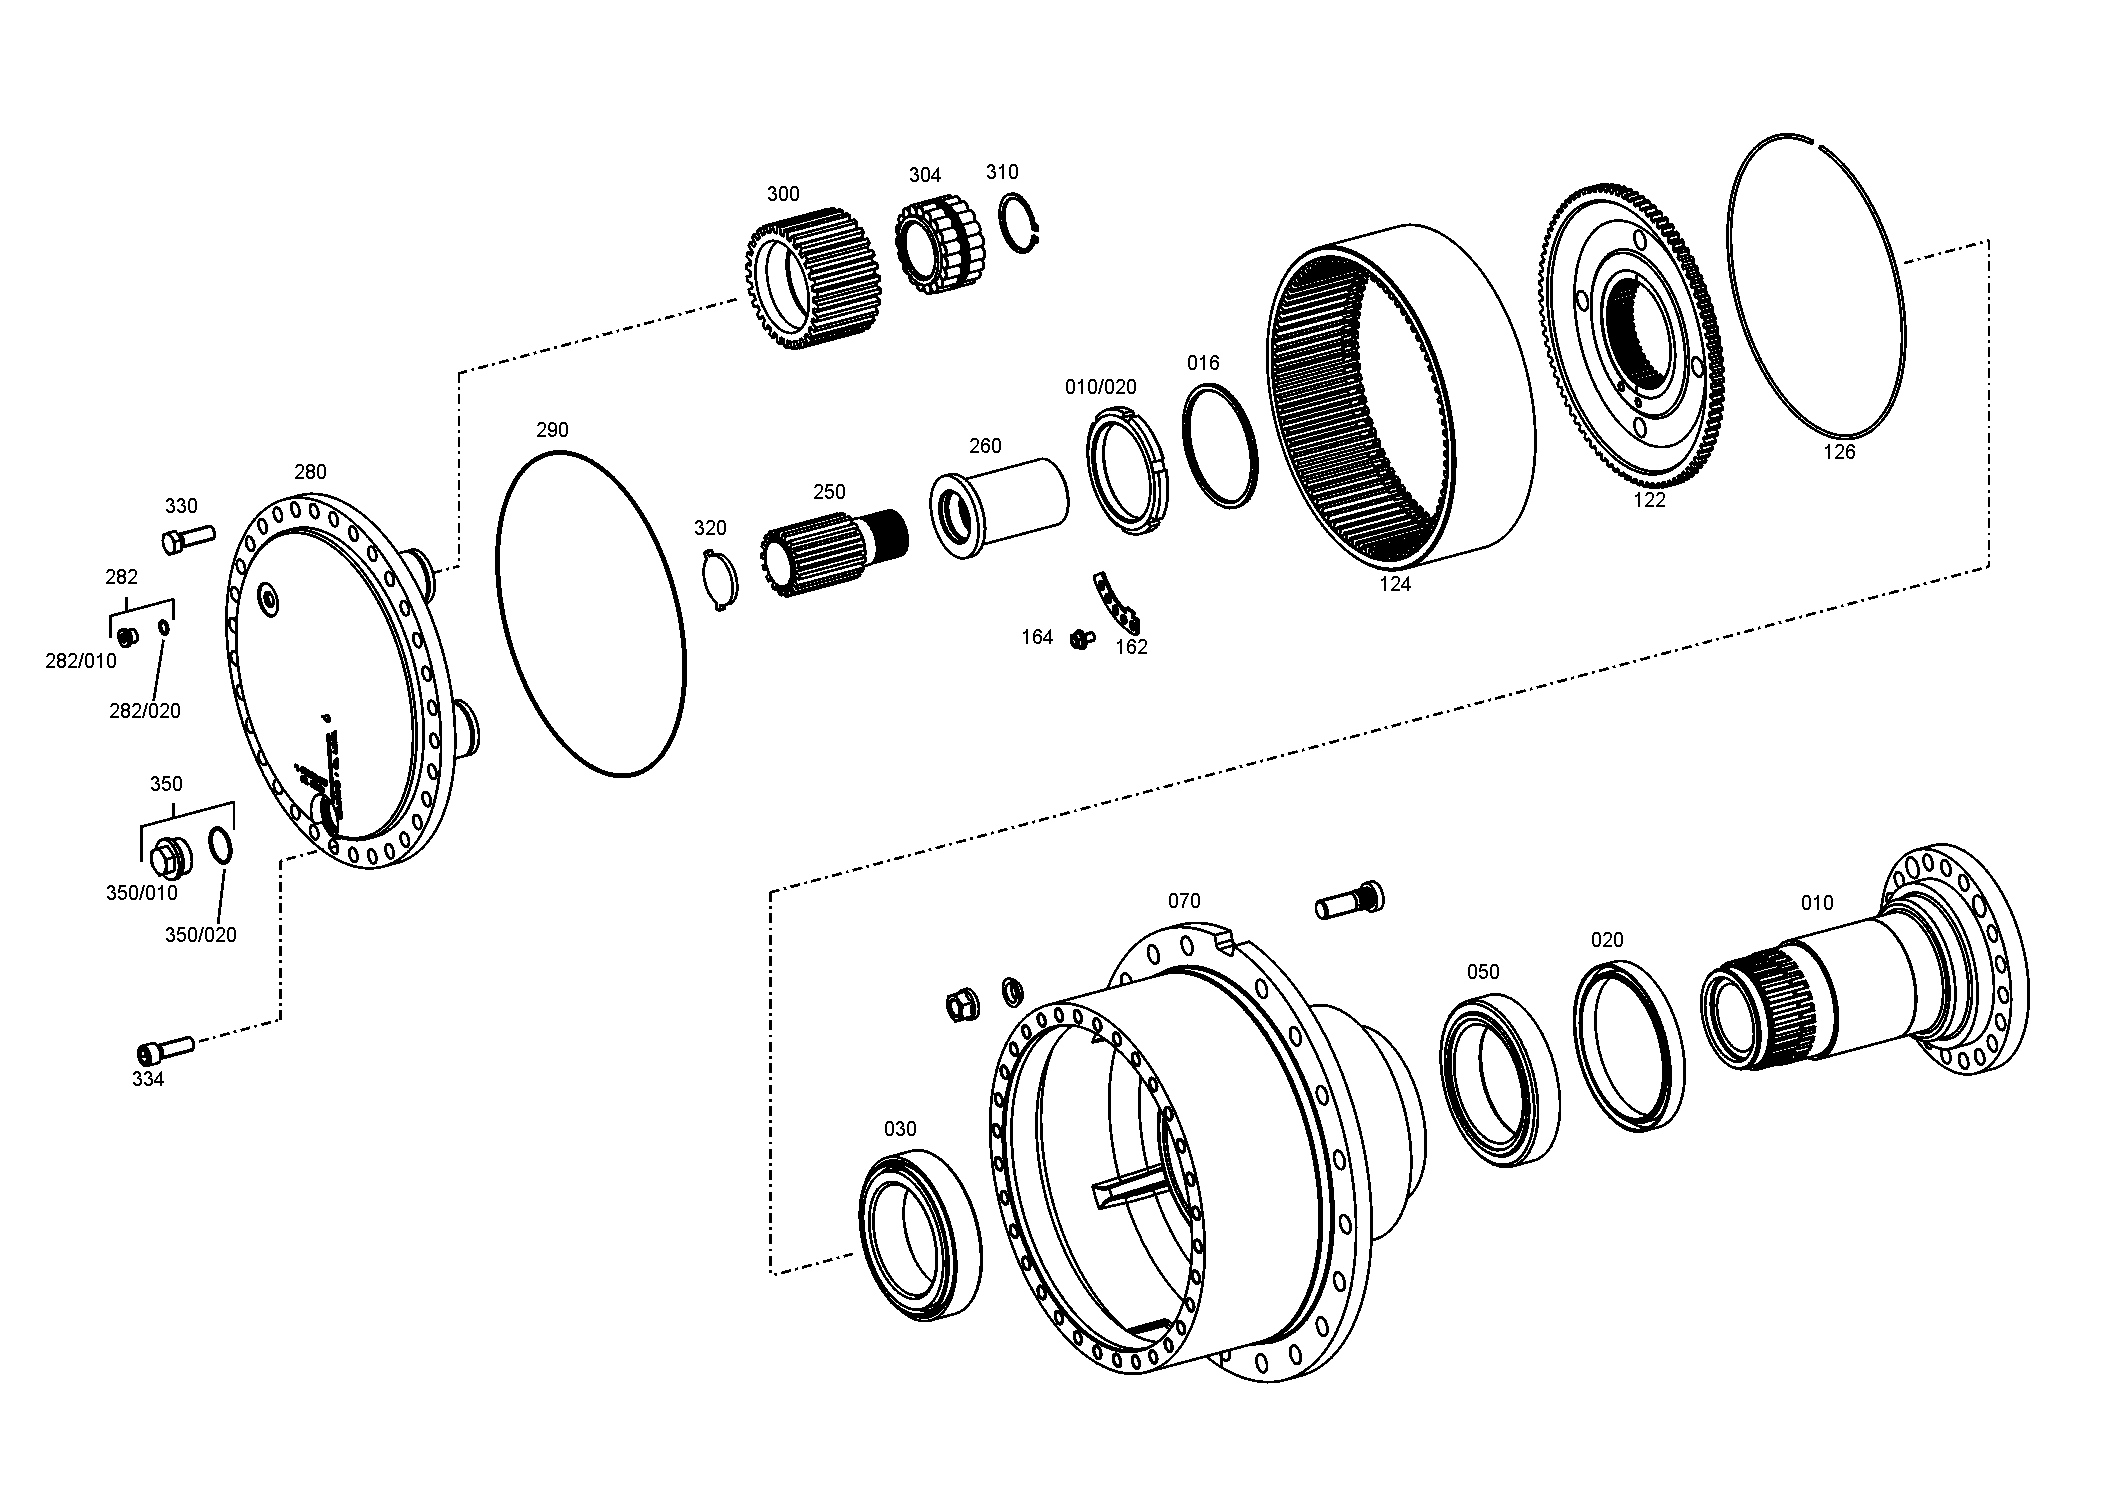 drawing for Astra Veicoli Industriali 0000000134642 - SHAFT SEAL (figure 5)